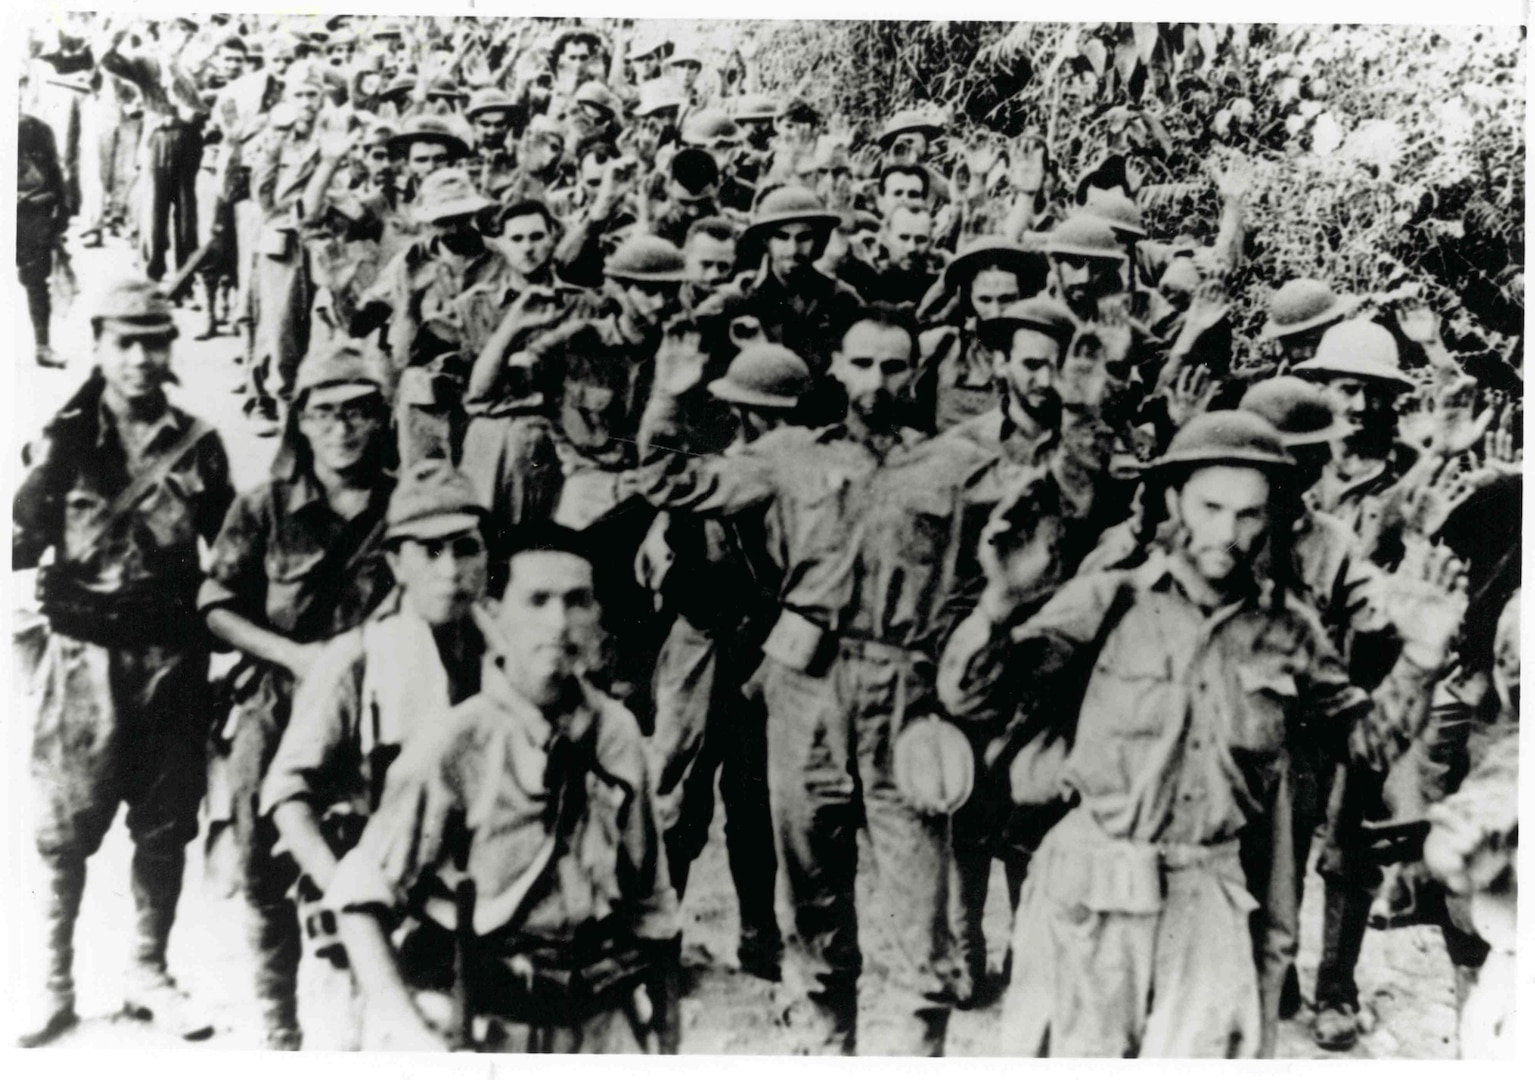 U.S. Army National Guard and Filipino soldiers shown at the outset of the Bataan Death March. Allied forces were forced to surrender to the Japanese on April 9, 1942, the largest surrender in U.S. history. Their defense and sacrifice under dire circumstances allowed the United States badly needed time to mobilize in the Pacific Theater of War, and avoided a greater catastrophe beyond the bombing of Pearl Harbor in December 1941.